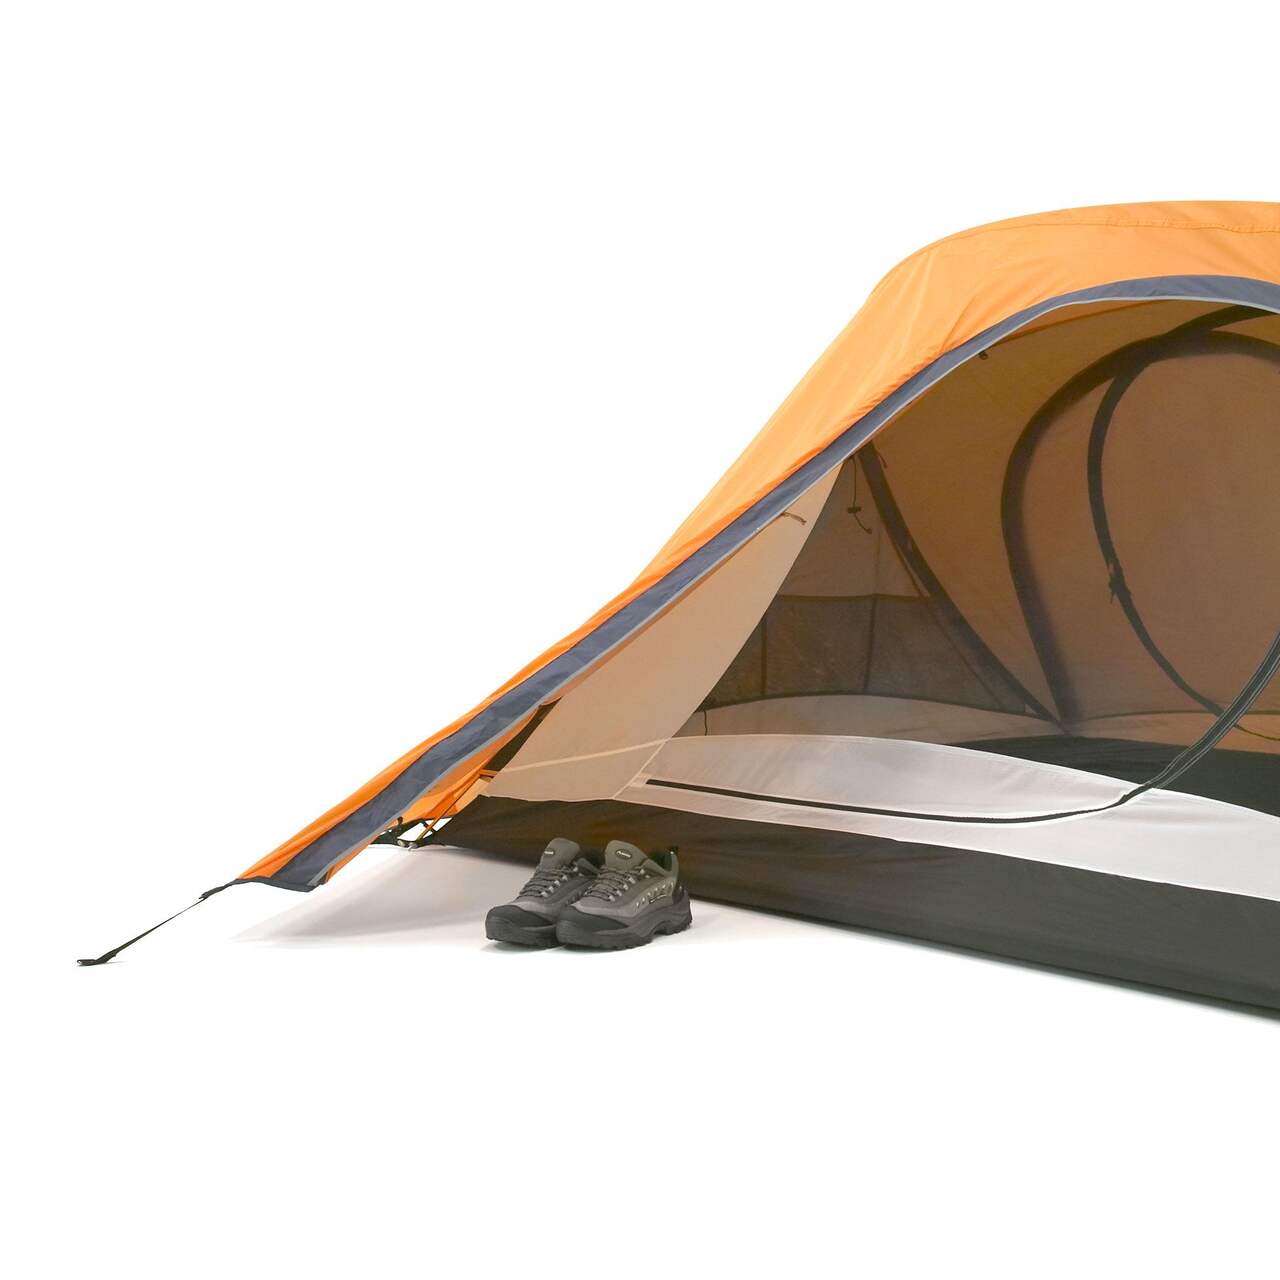 Outbound 3-Season, 4-Person Easy Set-Up Camping Dome Tent w/ Rain Fly &  Carry Bag